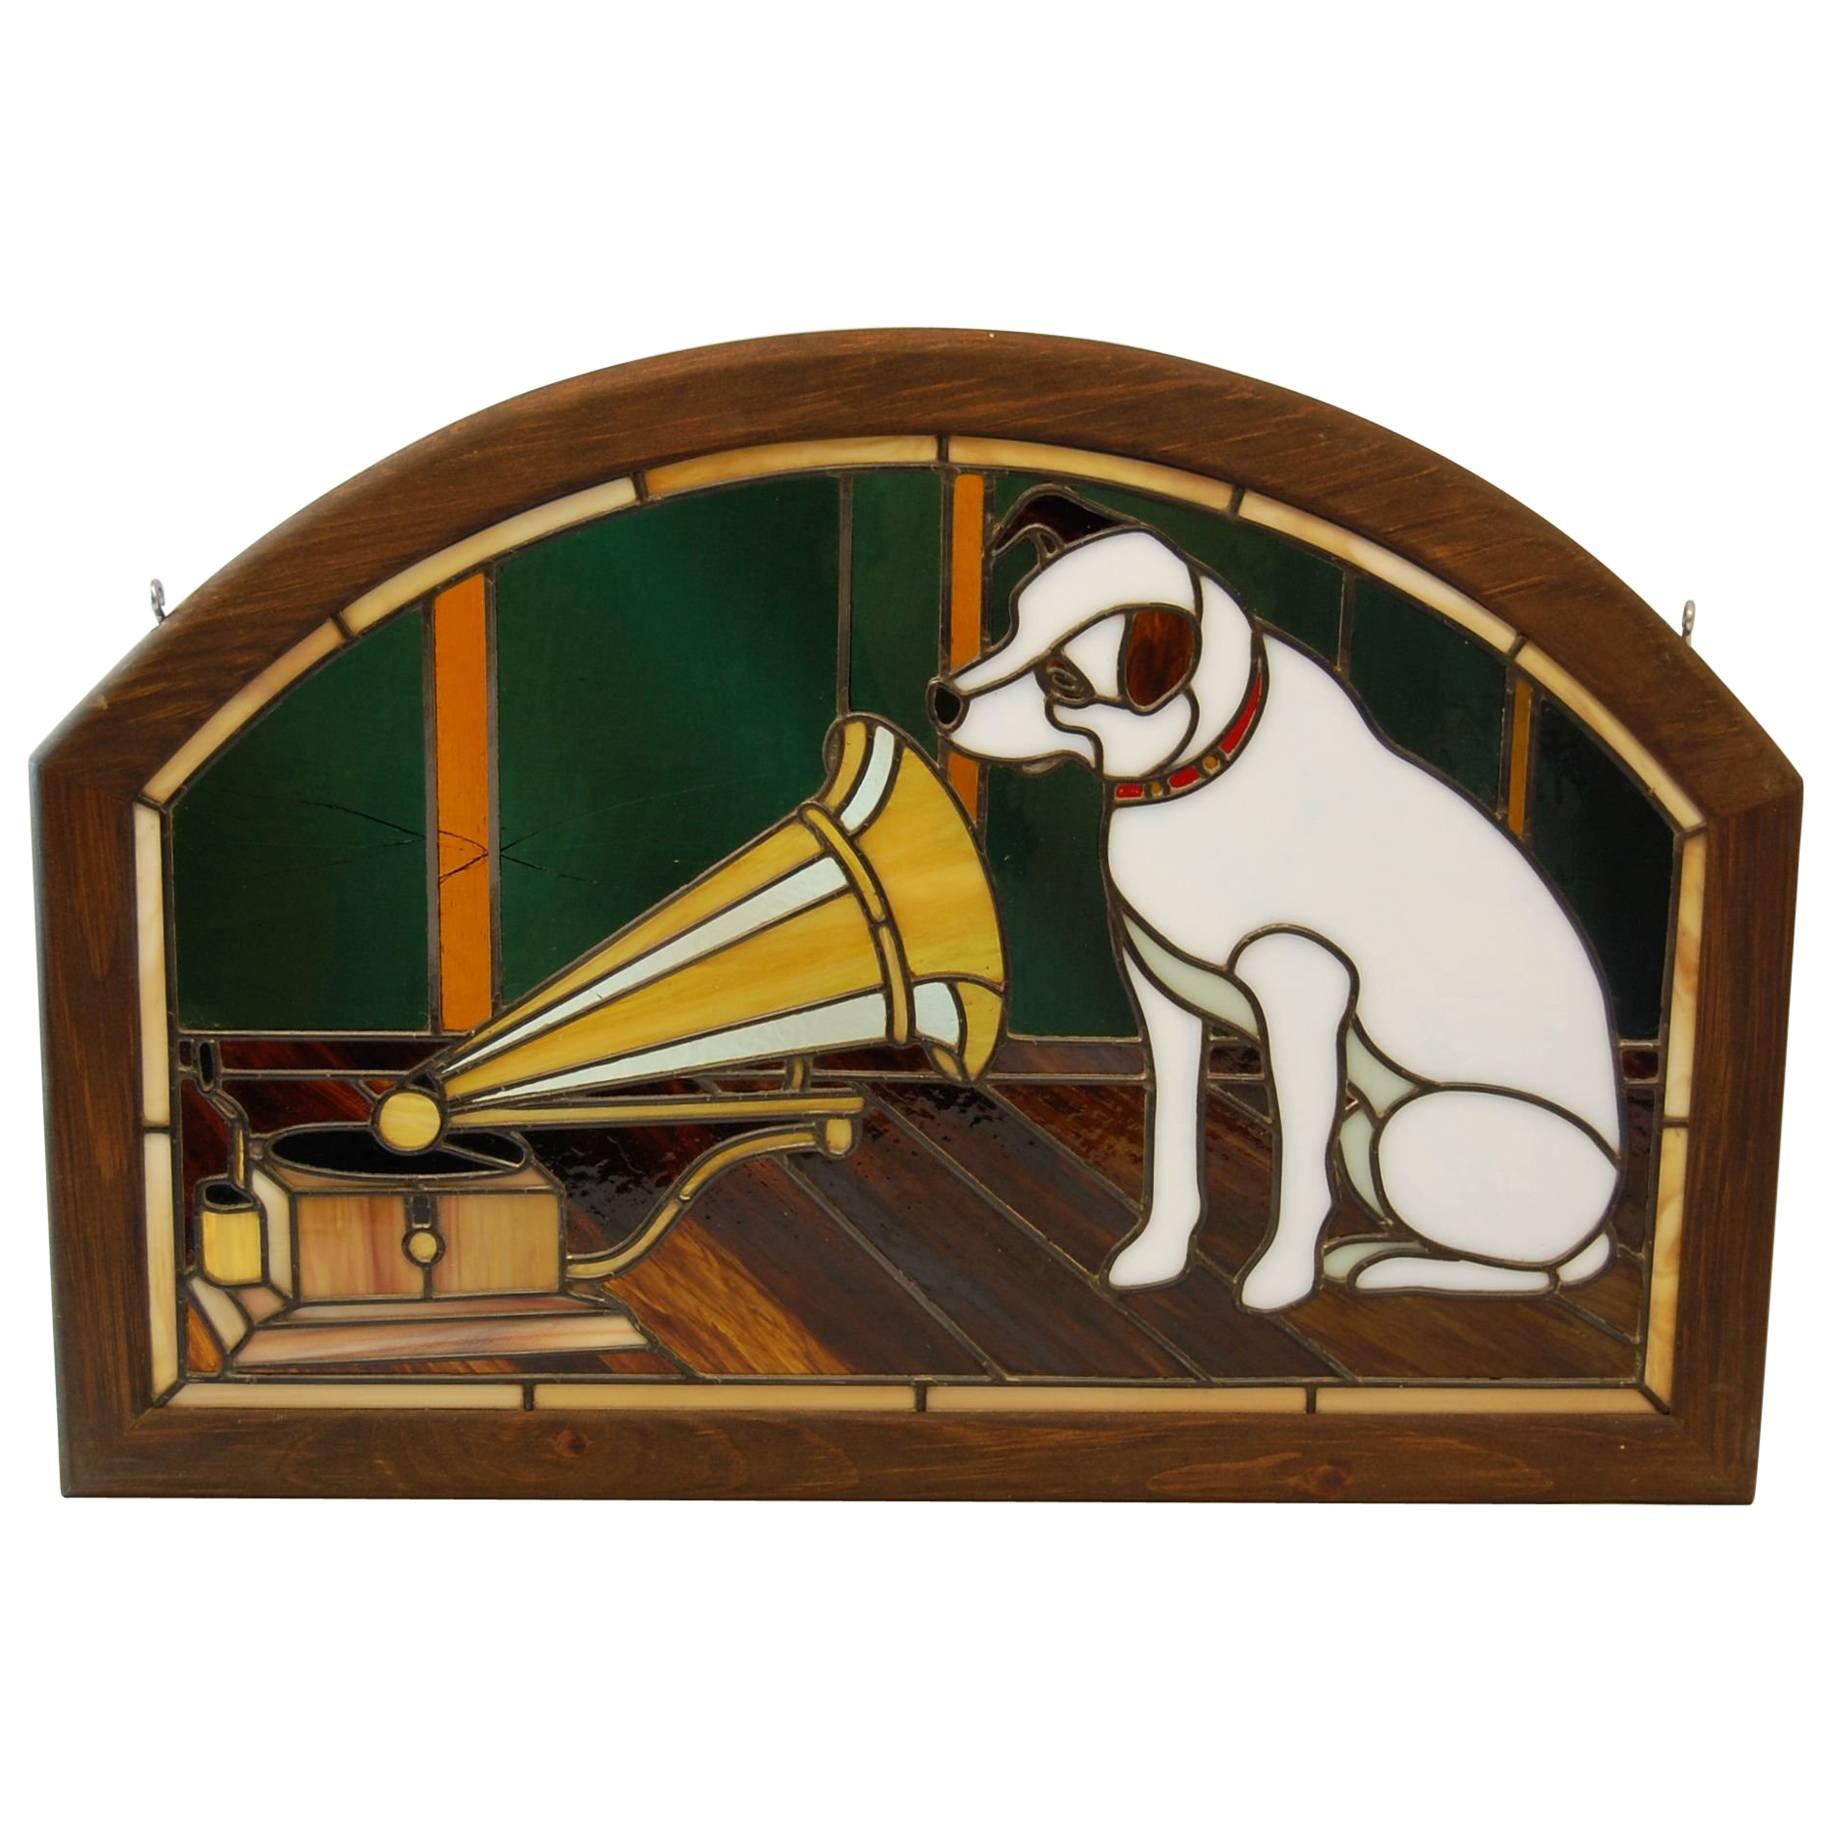 Stained Glass Panel Featuring the RCA Dog, Nipper in Wooden Frame For Sale